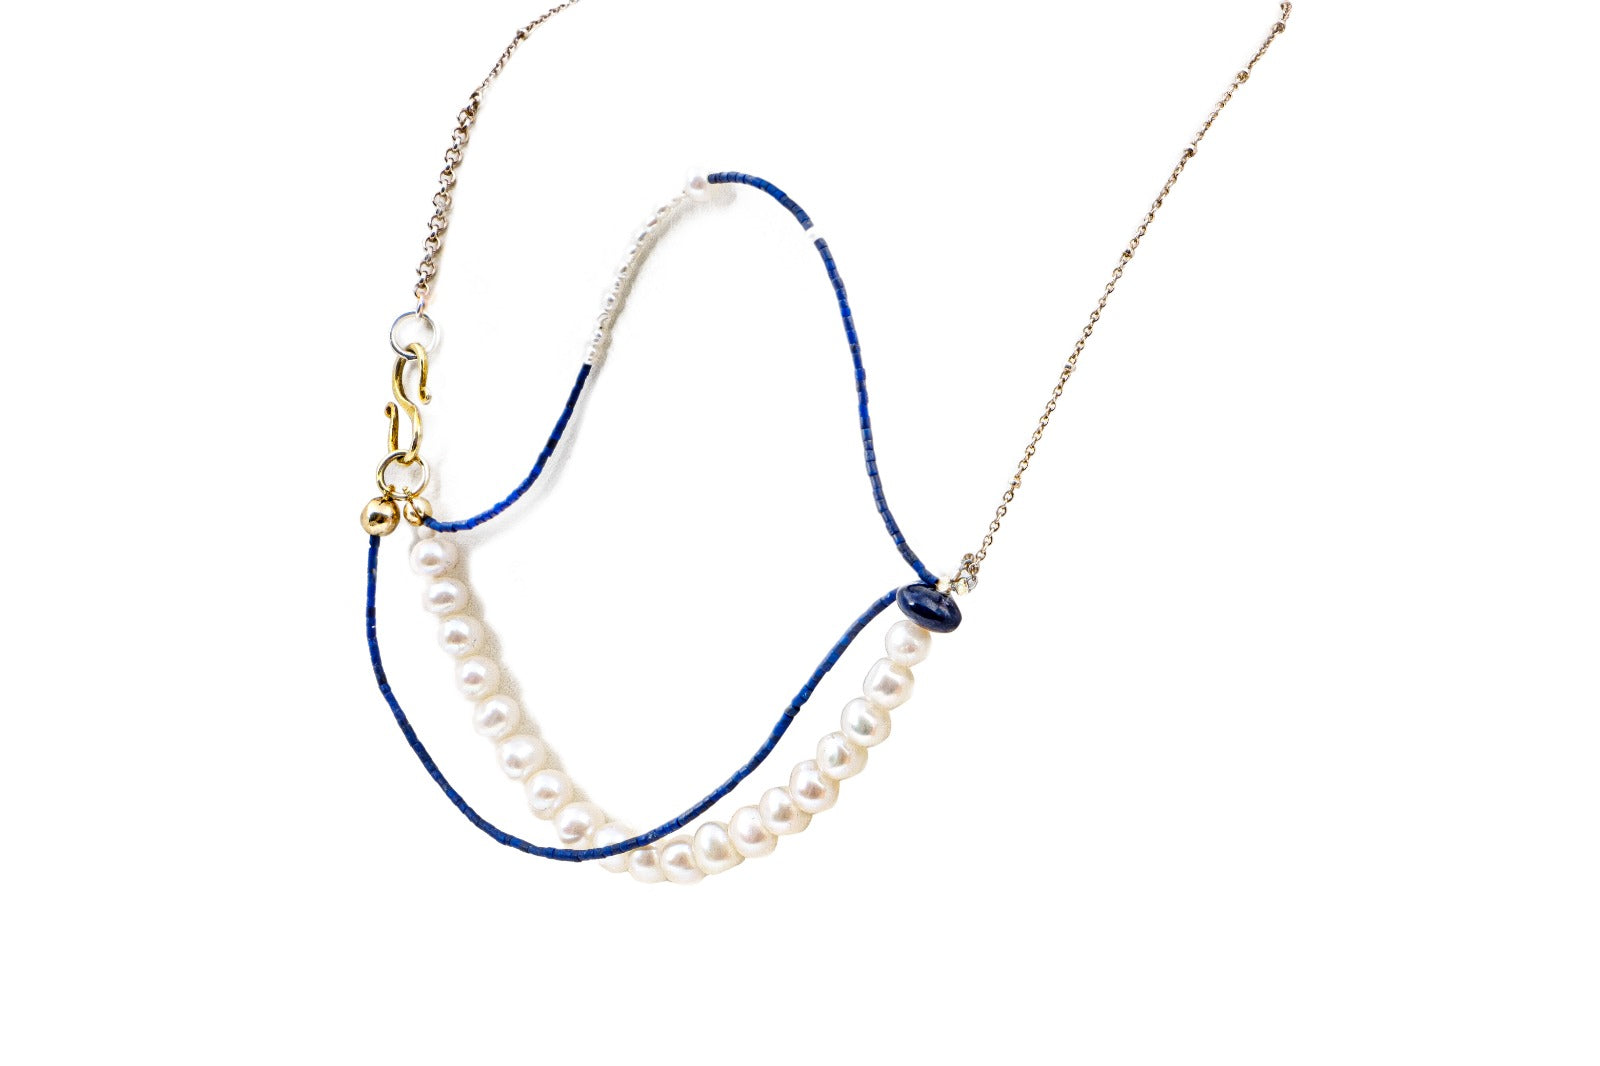 Pearls and Lapis Lazuli Necklace